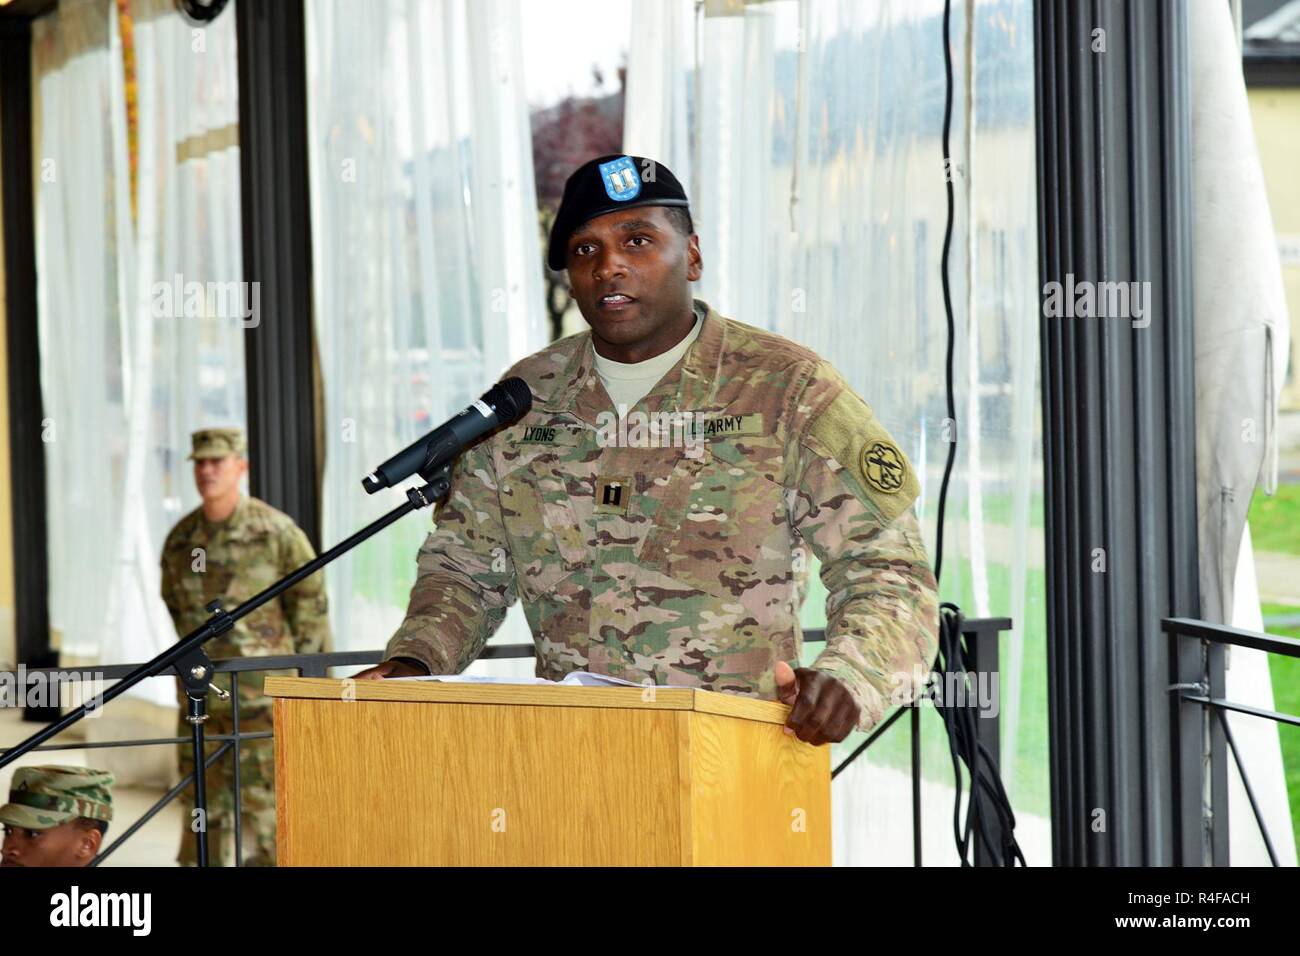 Former commander of Bravo Company, 307th Military Intelligence Battalion, Capt. Lawrence P. Lyons, gives a farewell speech, Oct 24, 2016 during the change of command ceremony at Caserma Ederle in Vicenza, Italy. Stock Photo